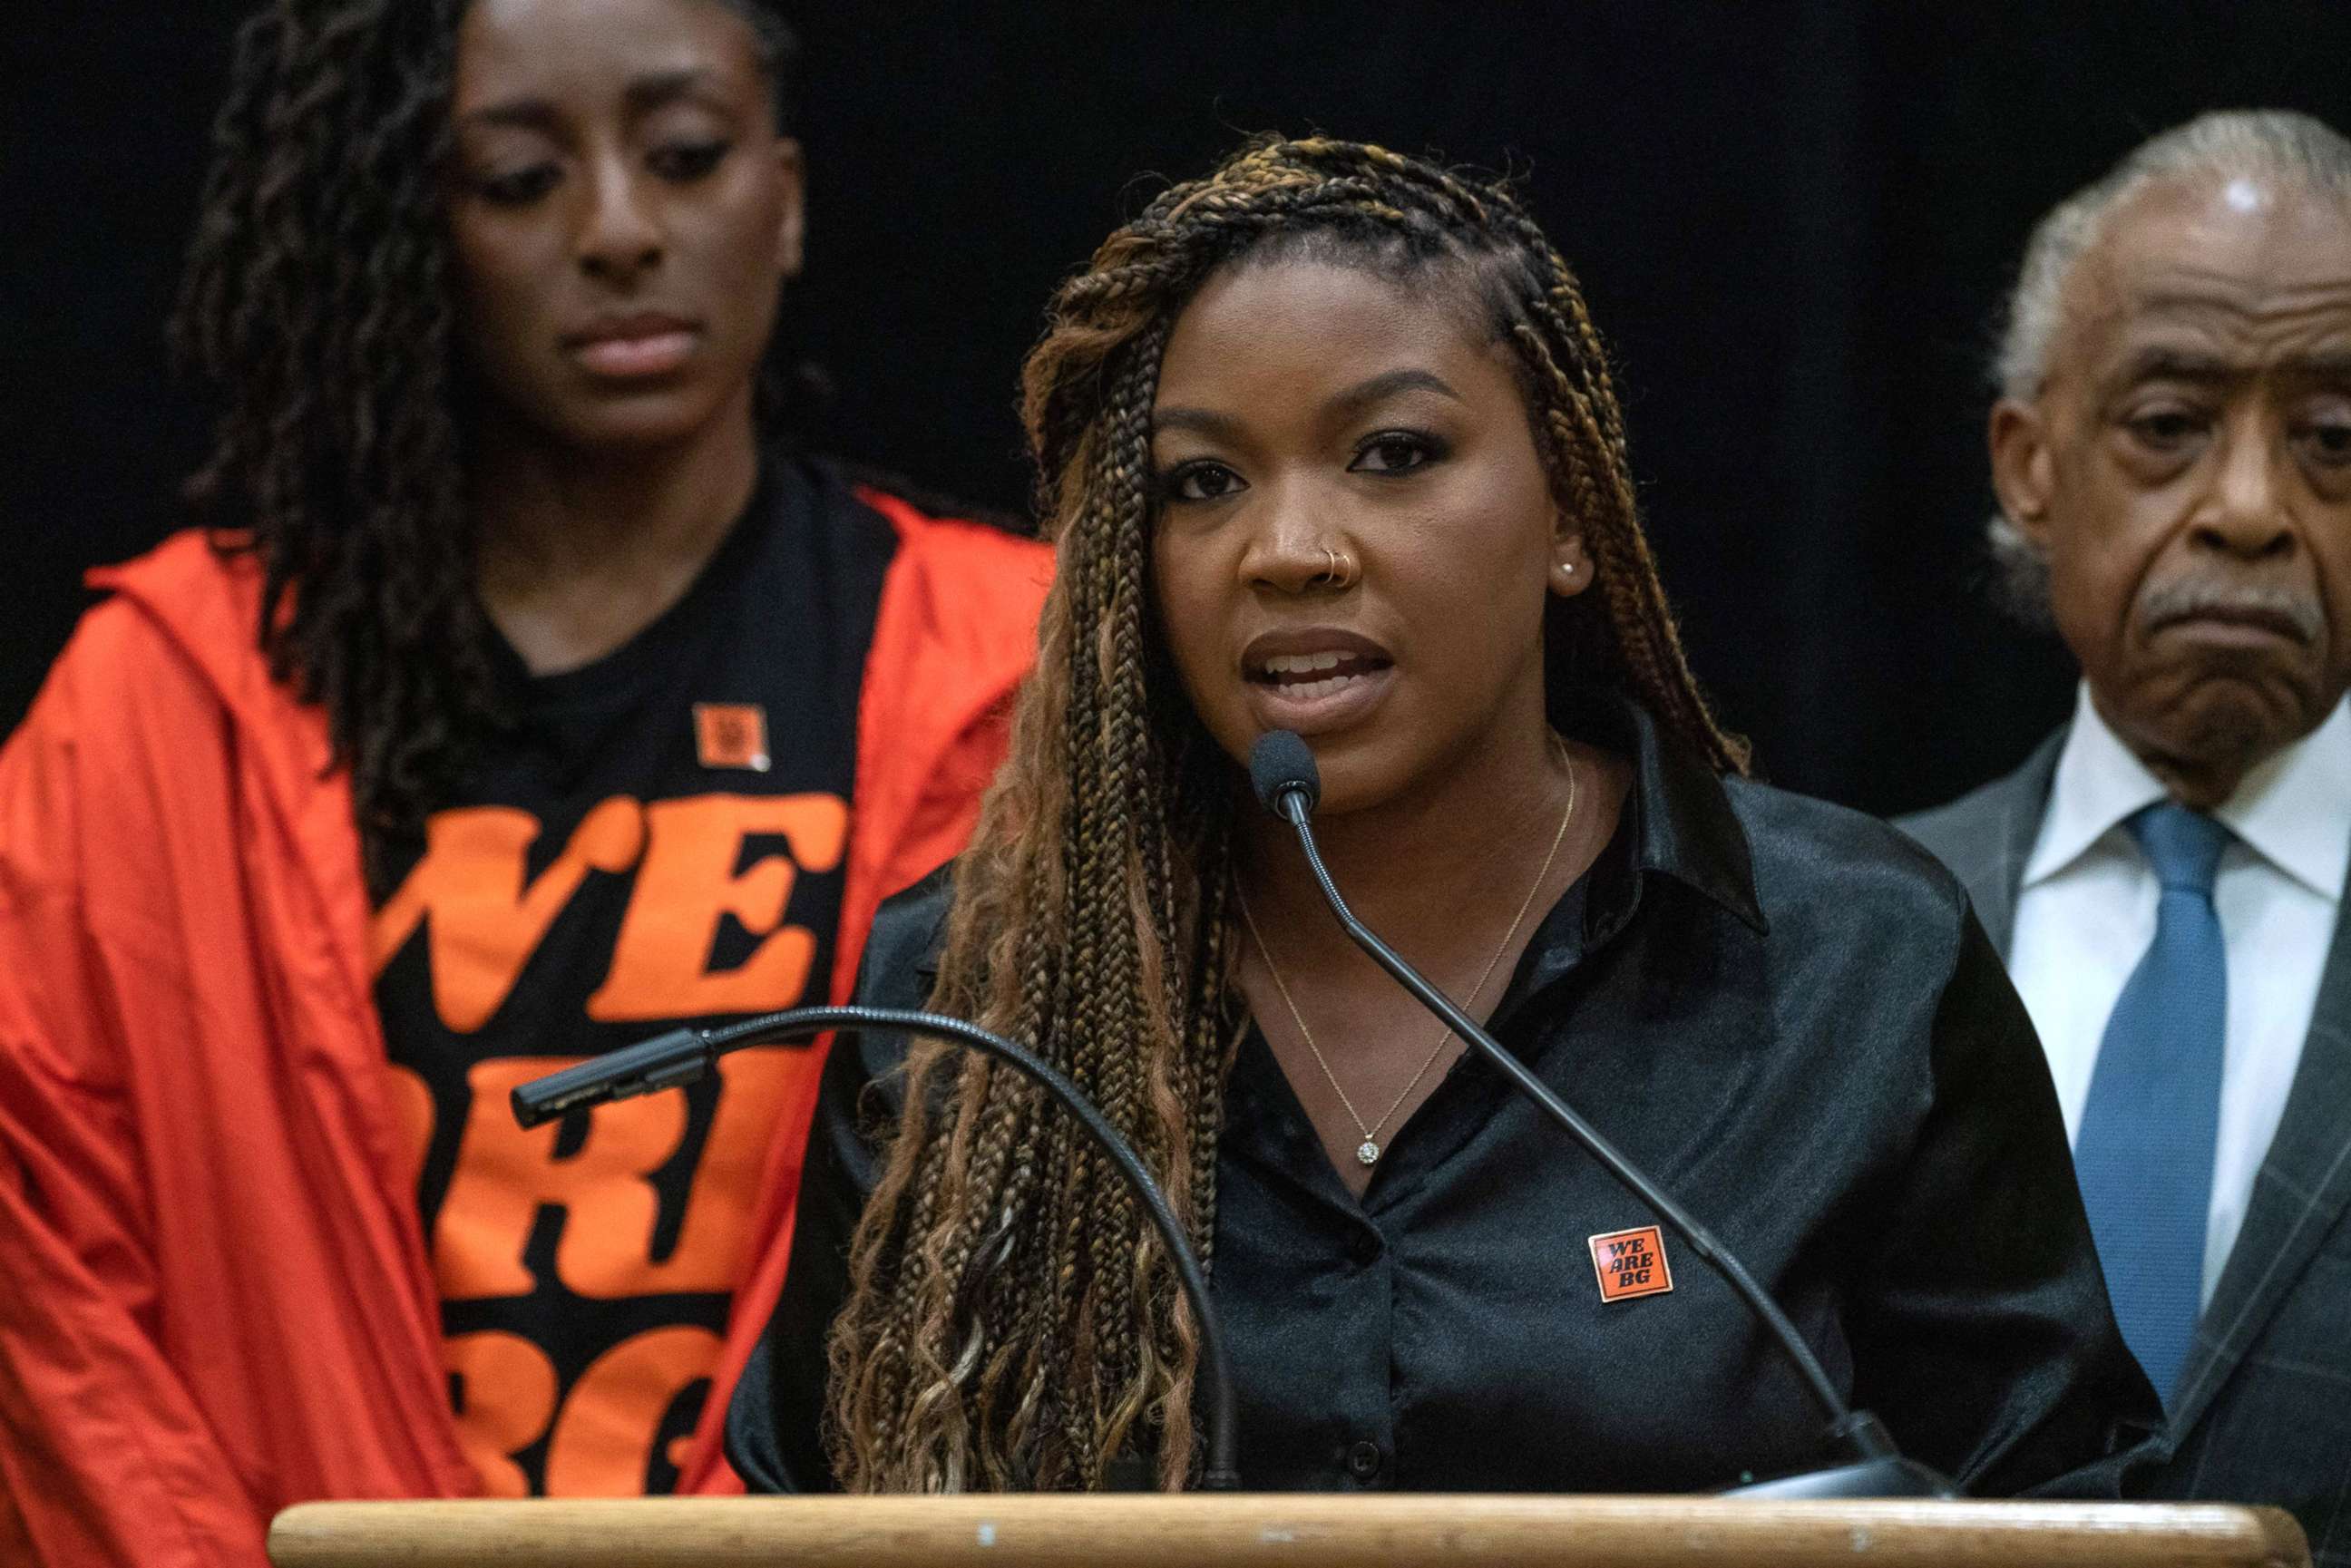 PHOTO: Cherelle Griner, wife of professional basketball player Brittney Griner, speaks during a press conference on July 8, 2022, in Chicago, in support of Griner's release from prison in Russia.